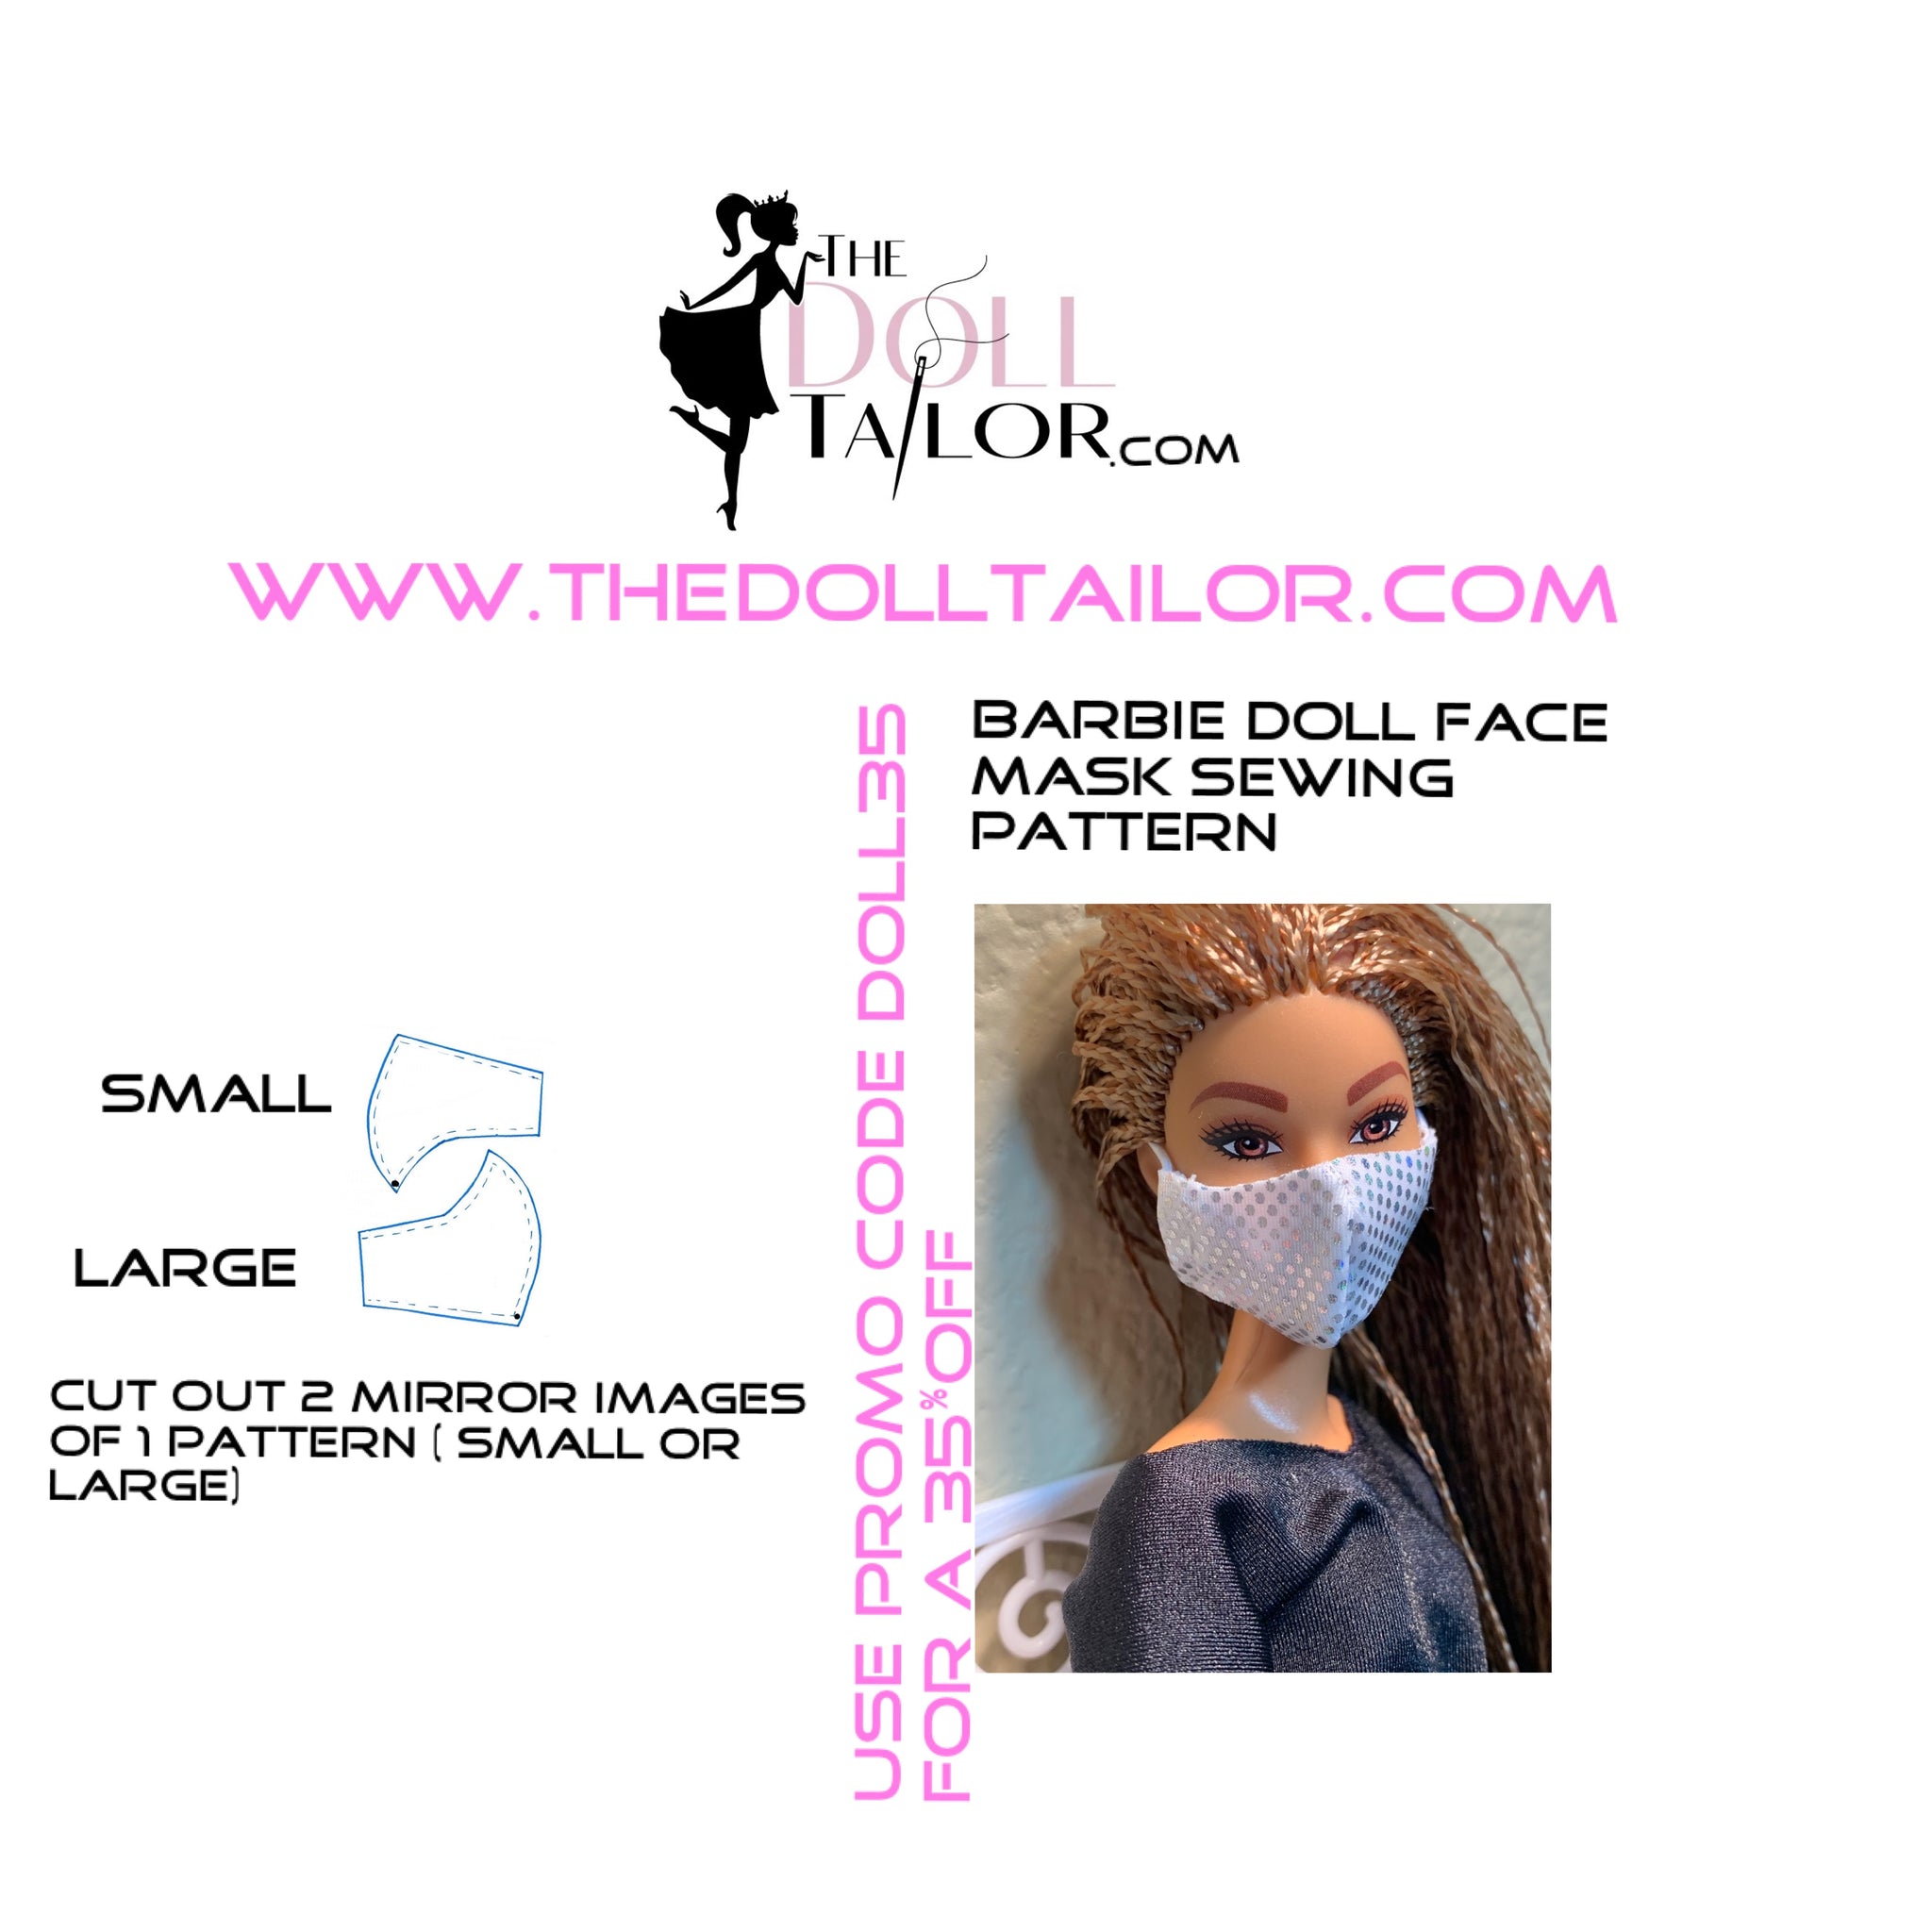 How to sew a face mask for Barbie doll sewing pattern for Barbie dolls